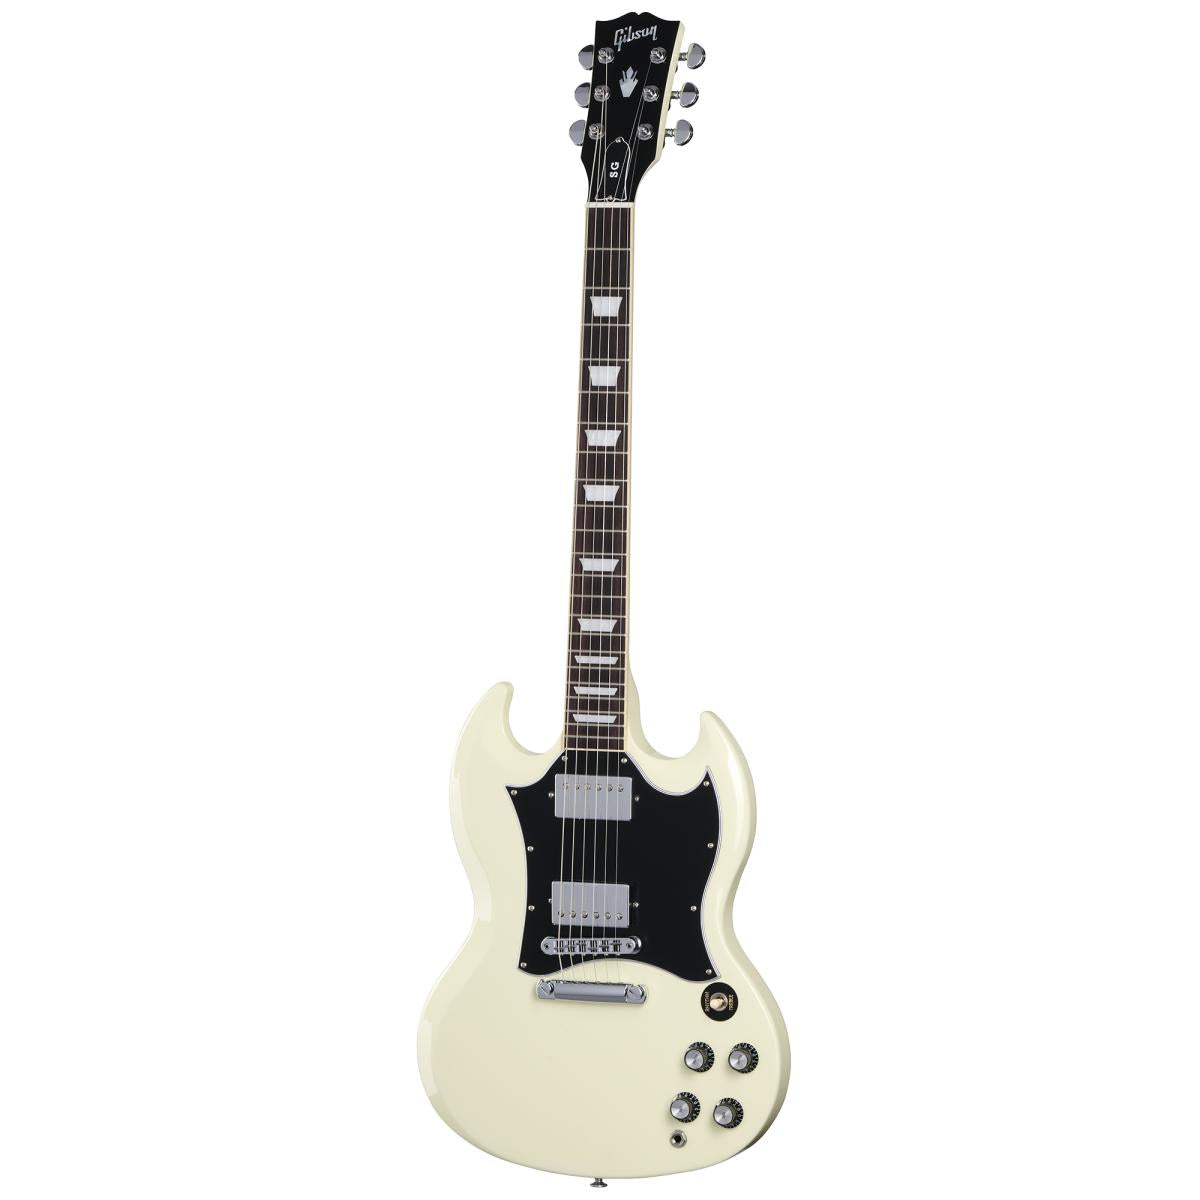 Gibson SG Standard Electric Guitar Classic White w/ Hardcase - SGS00CWCH1